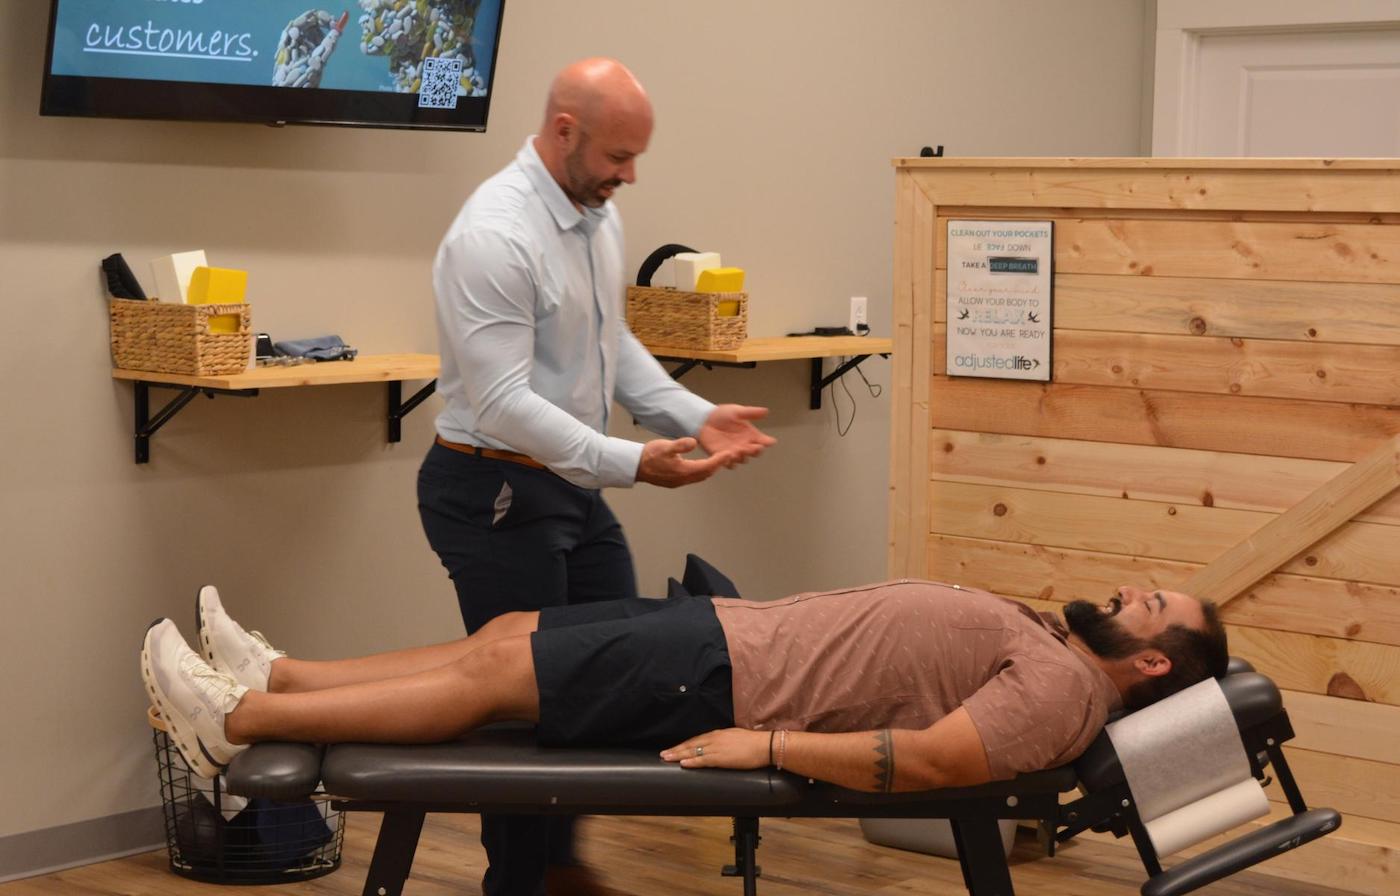 Dr. Coty Spraggs treating a man's automotive injury pain with chiropractic adjustment